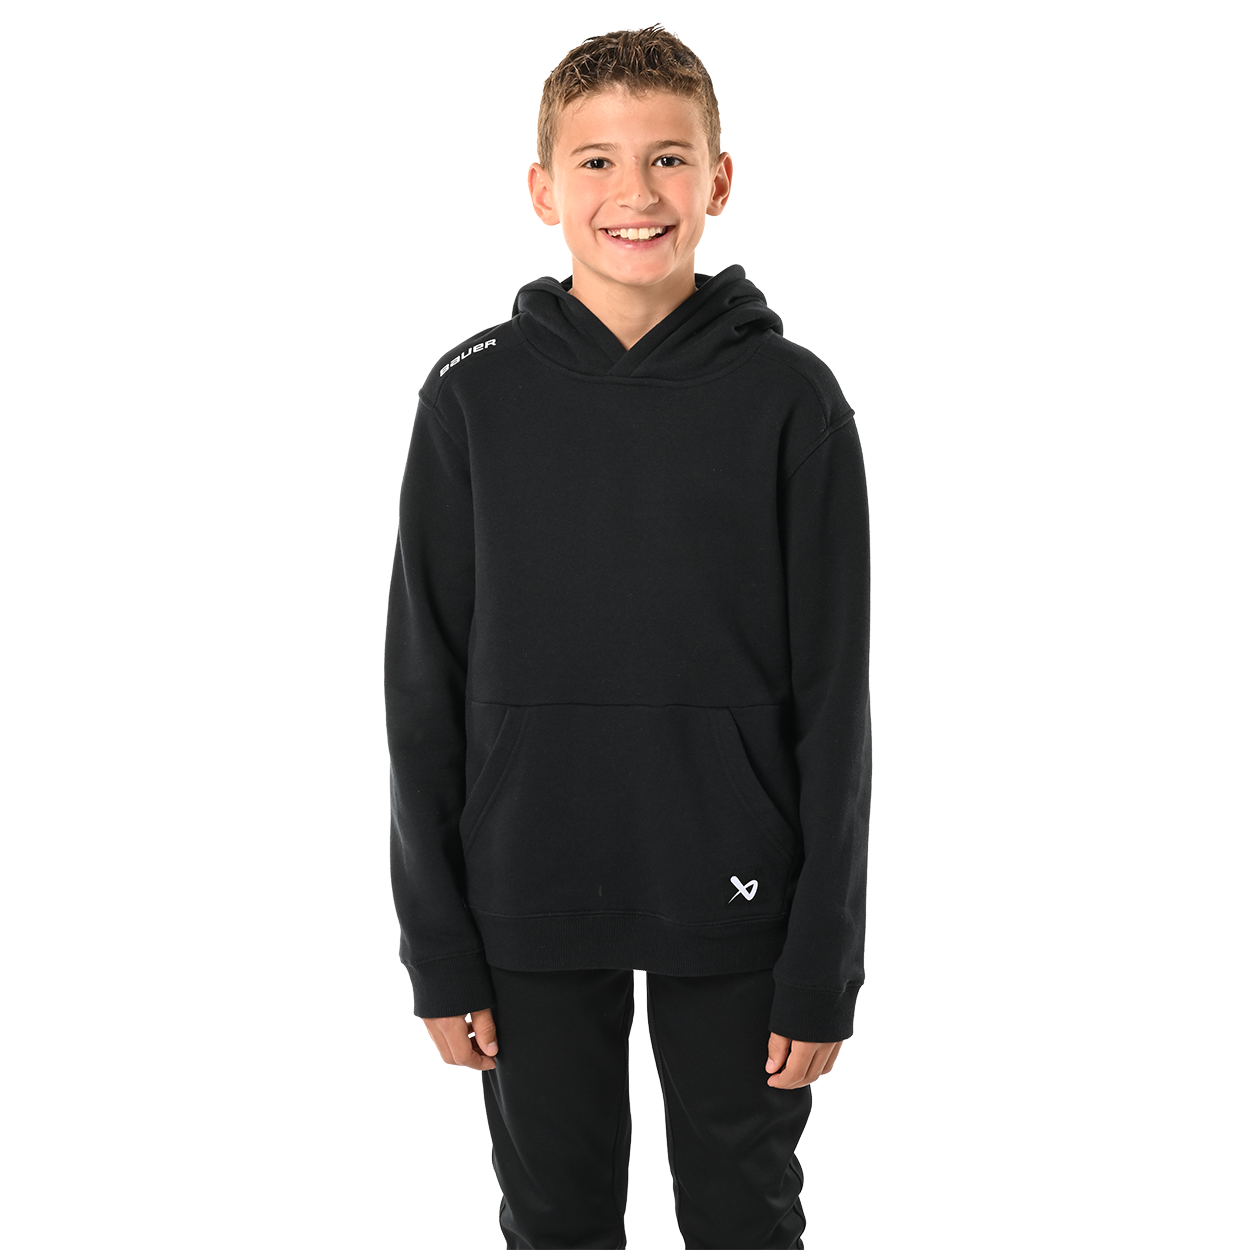 Youth Athletic Clothing & Kids Apparel